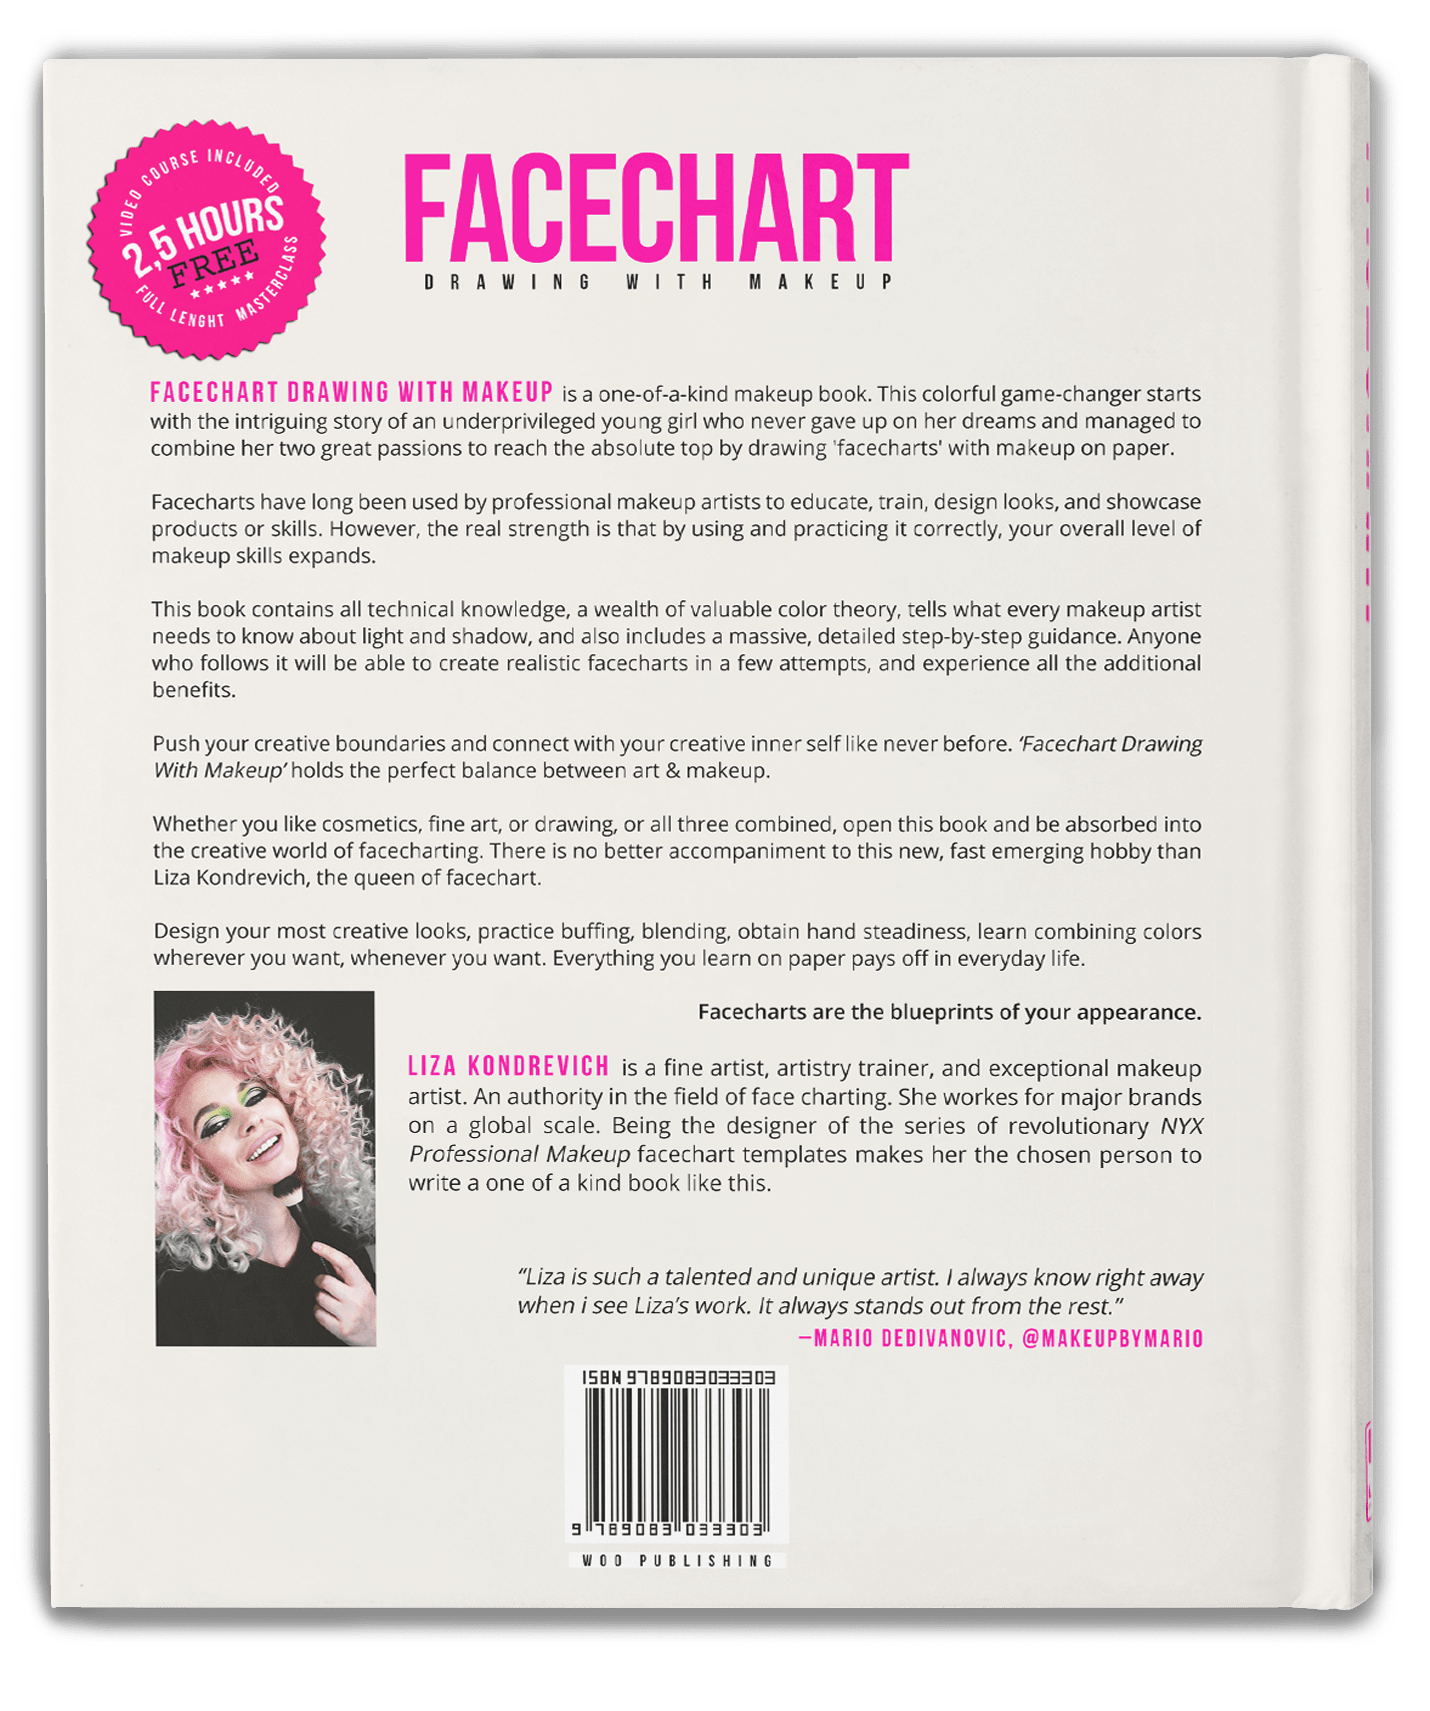 back cover of The Book about face chart makeup. The backside of the facechart book by liza kondrevich